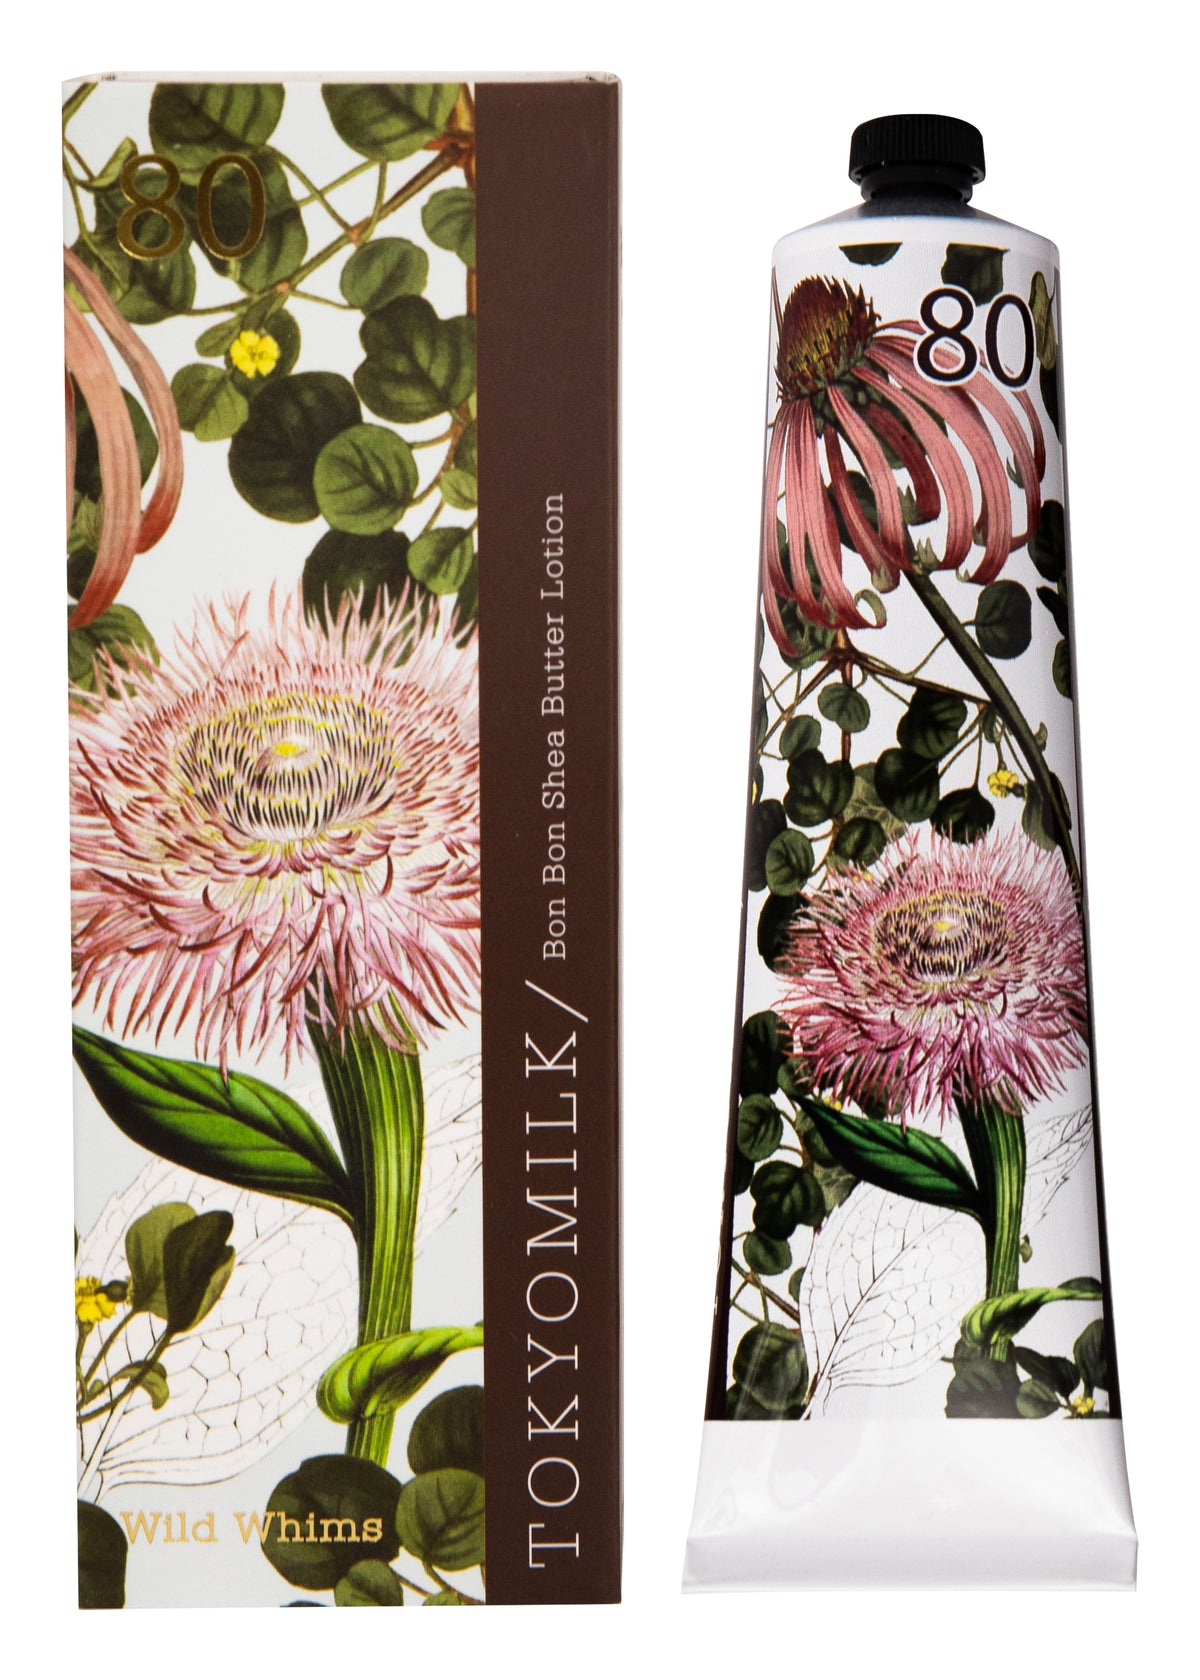 An elegantly designed Margot Elena TokyoMilk Wild Whims No. 80 Bon Bon Shea Butter Lotion packaging with botanical illustrations of pink and white flowers on a white background, featuring Shea Butter and a matching lotion tube to its right.